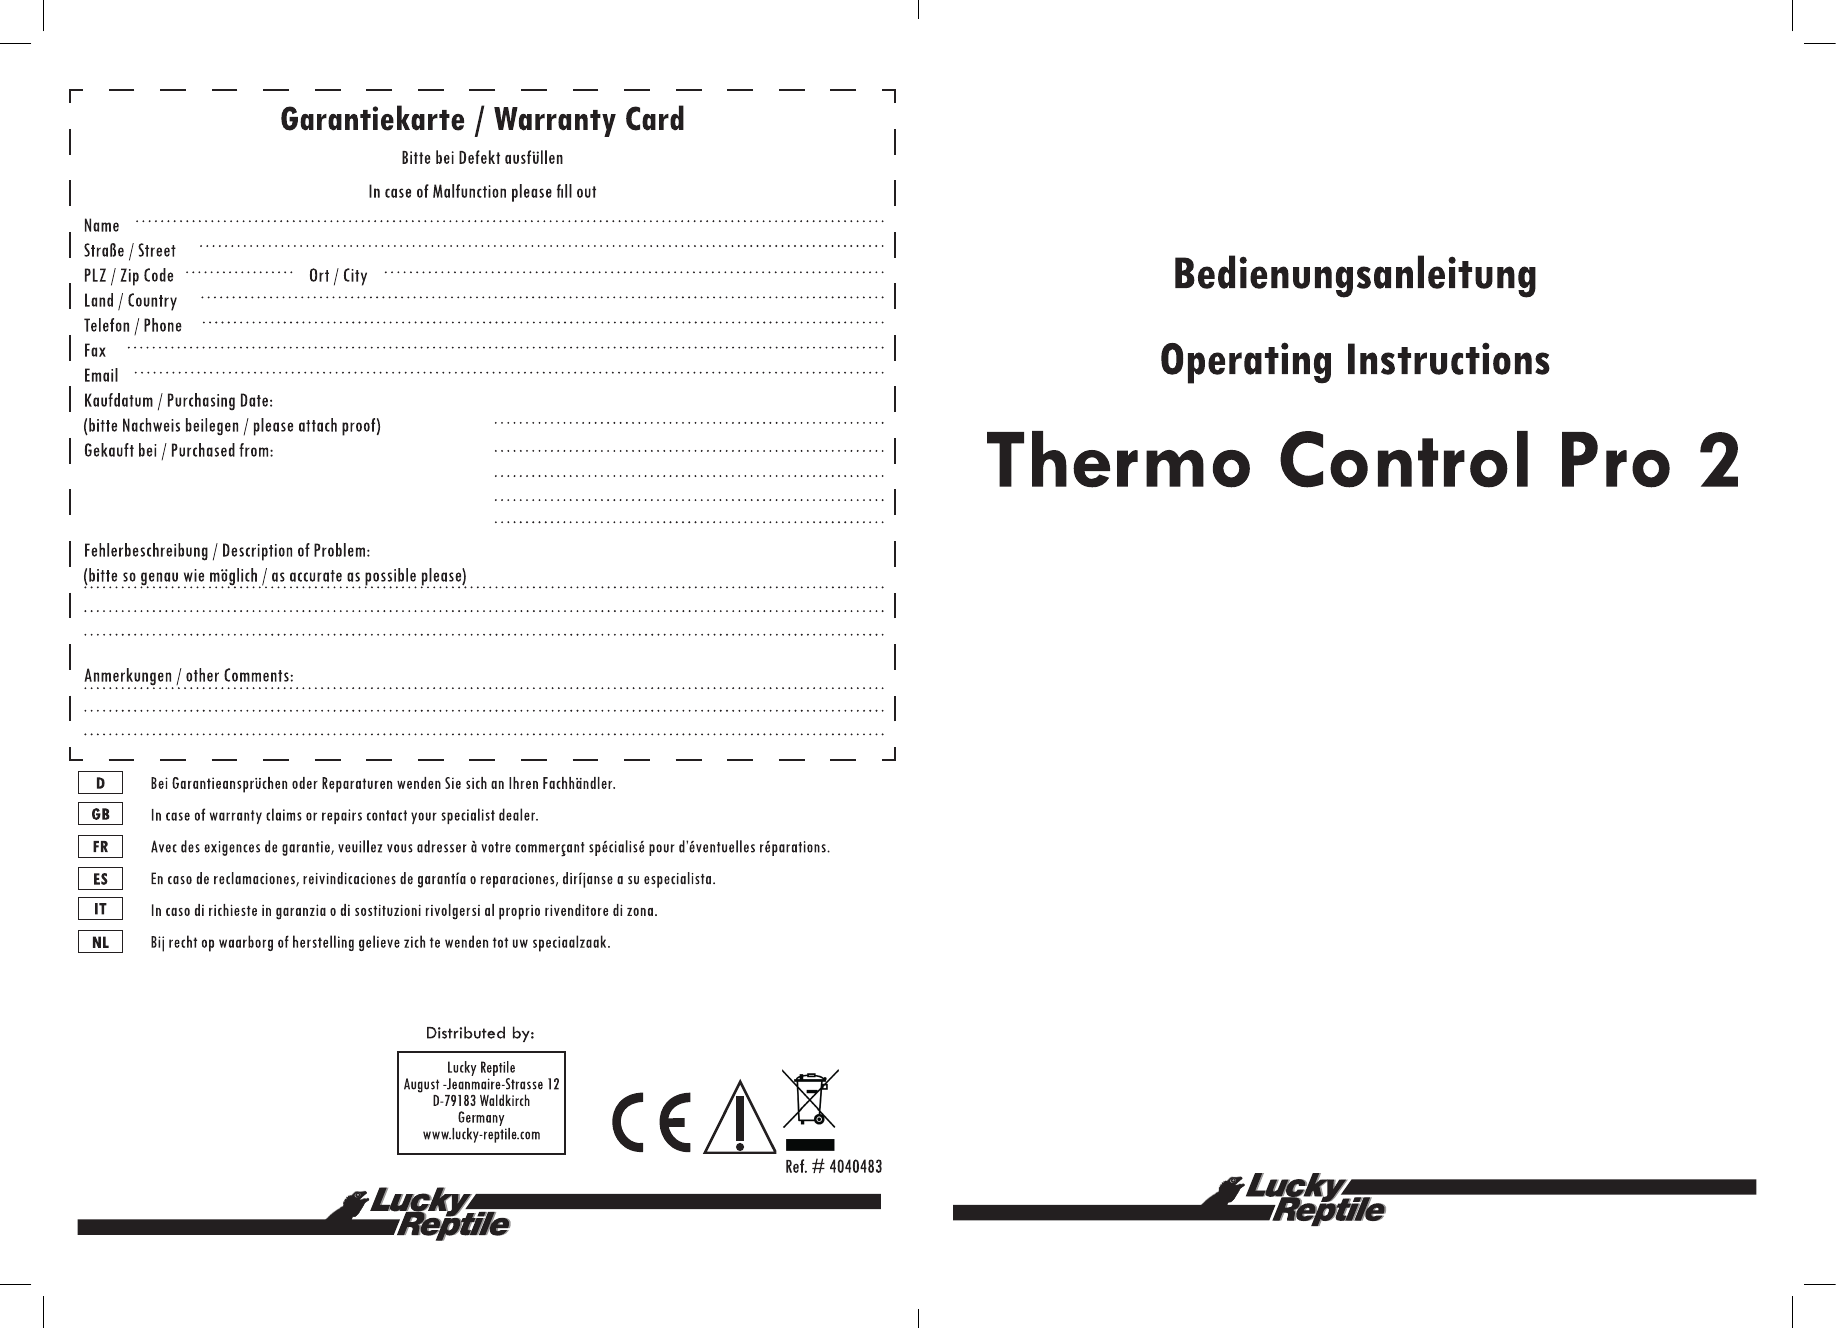 Page 1 of 8 - Thermo Control Pro  2